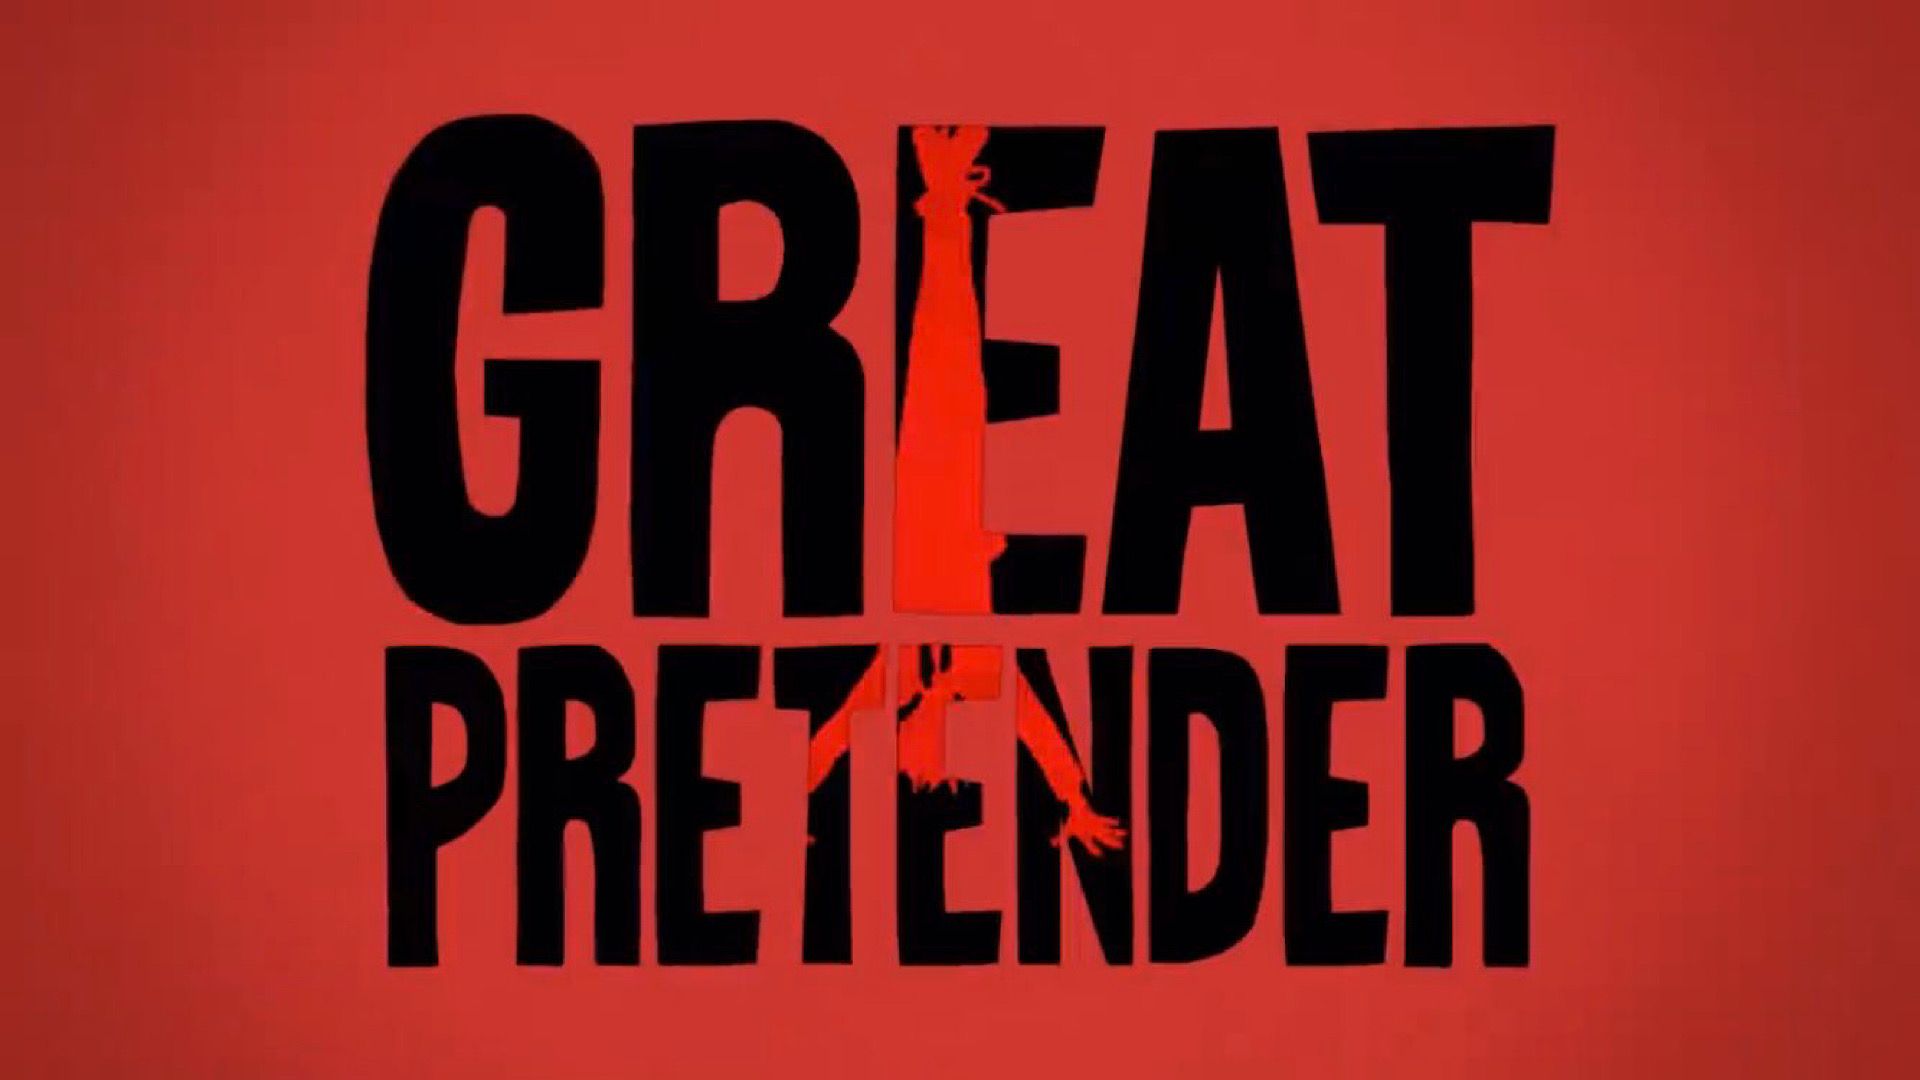 Great Pretender countdown many days until the next episode